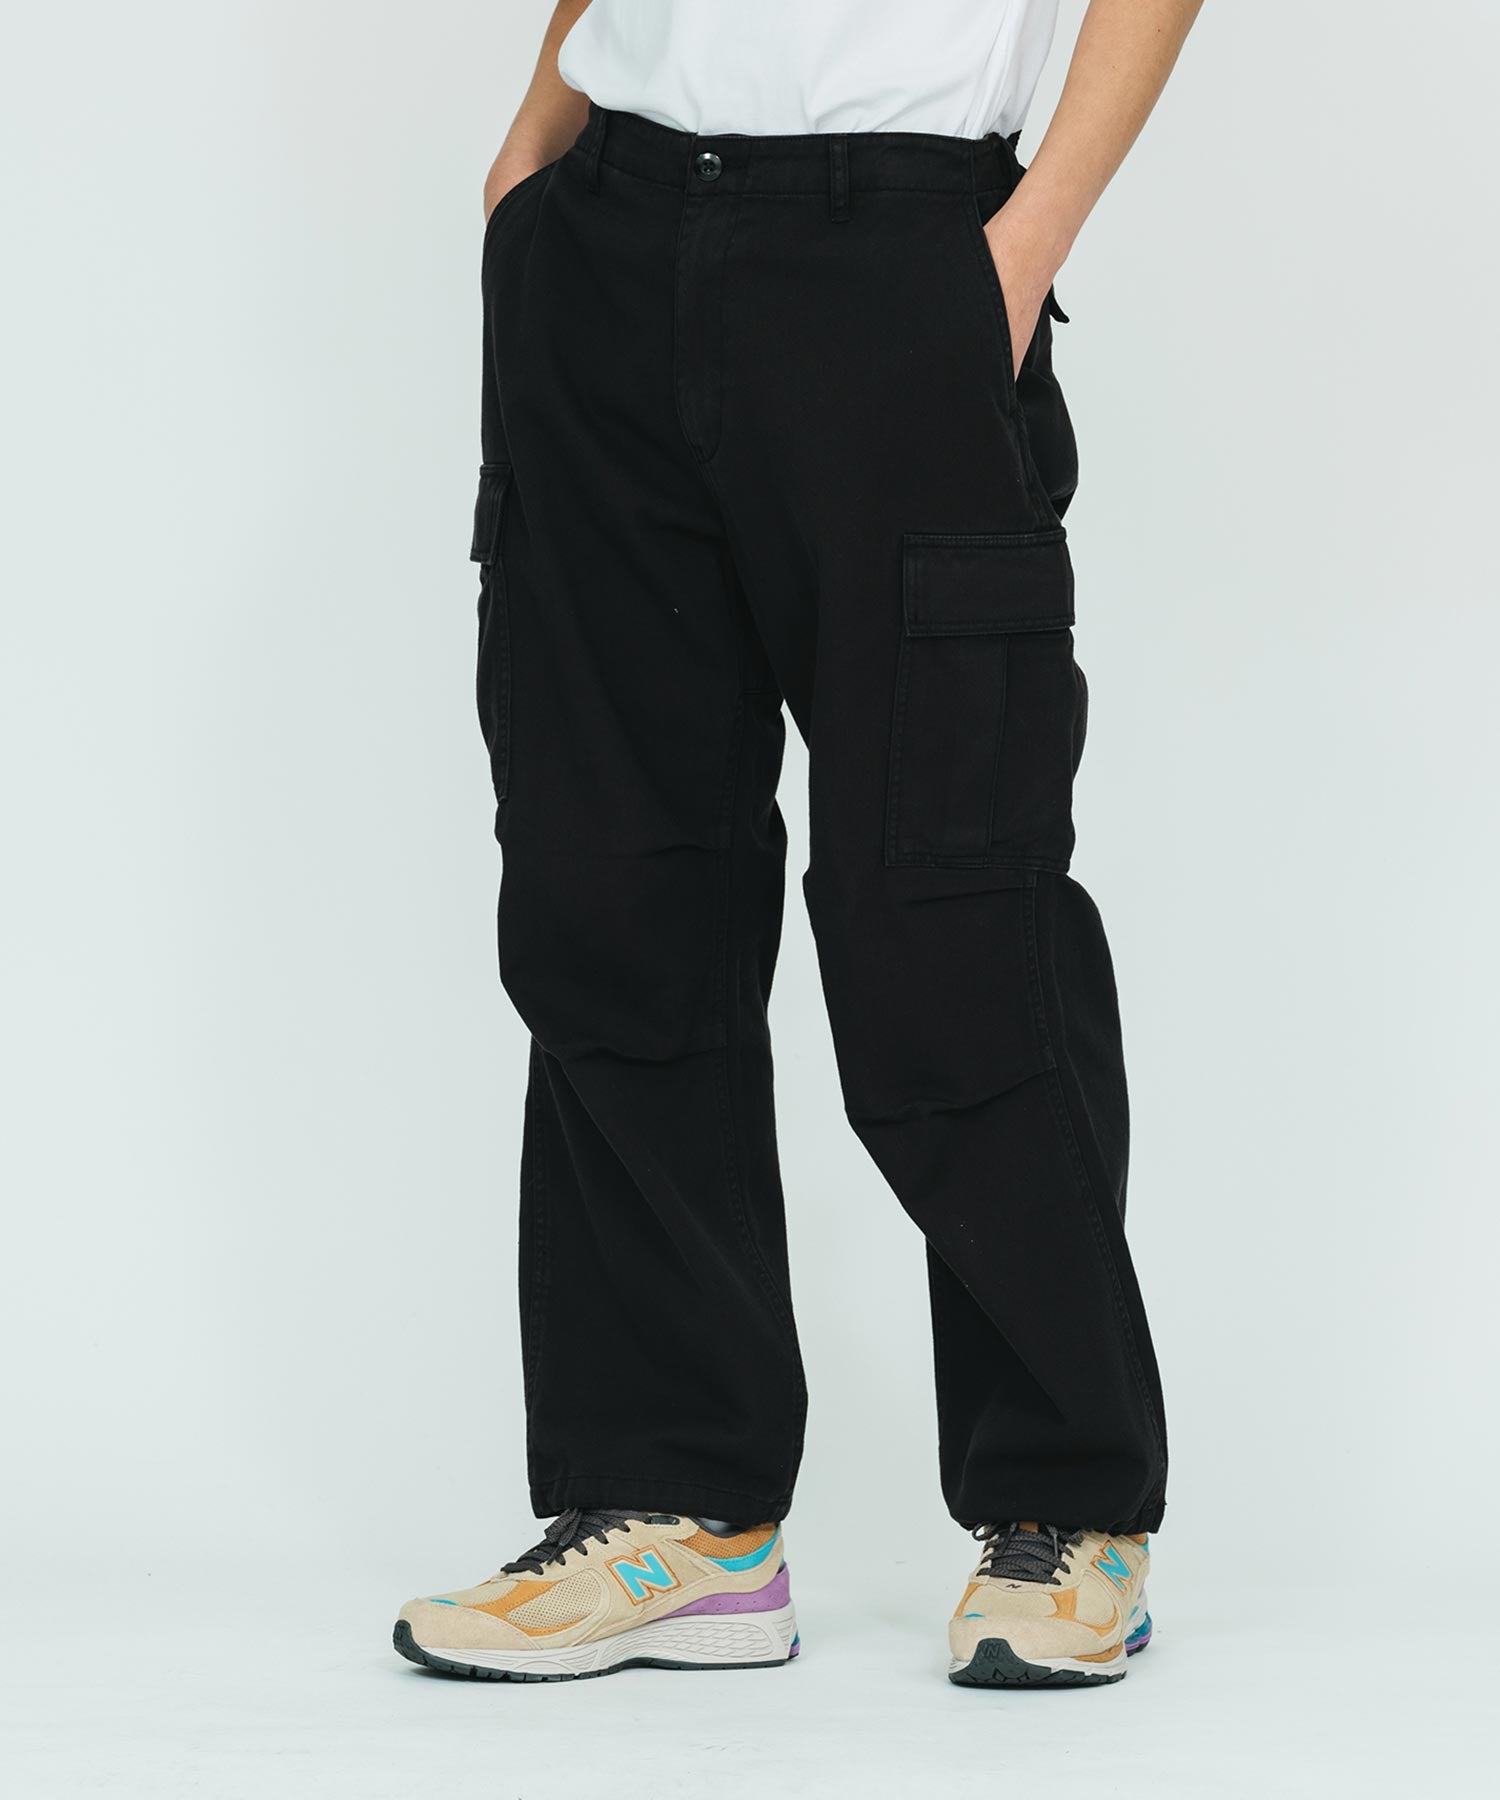 Cargo Pocket Straight Fit Pant (Beige/Black) – Your Drip